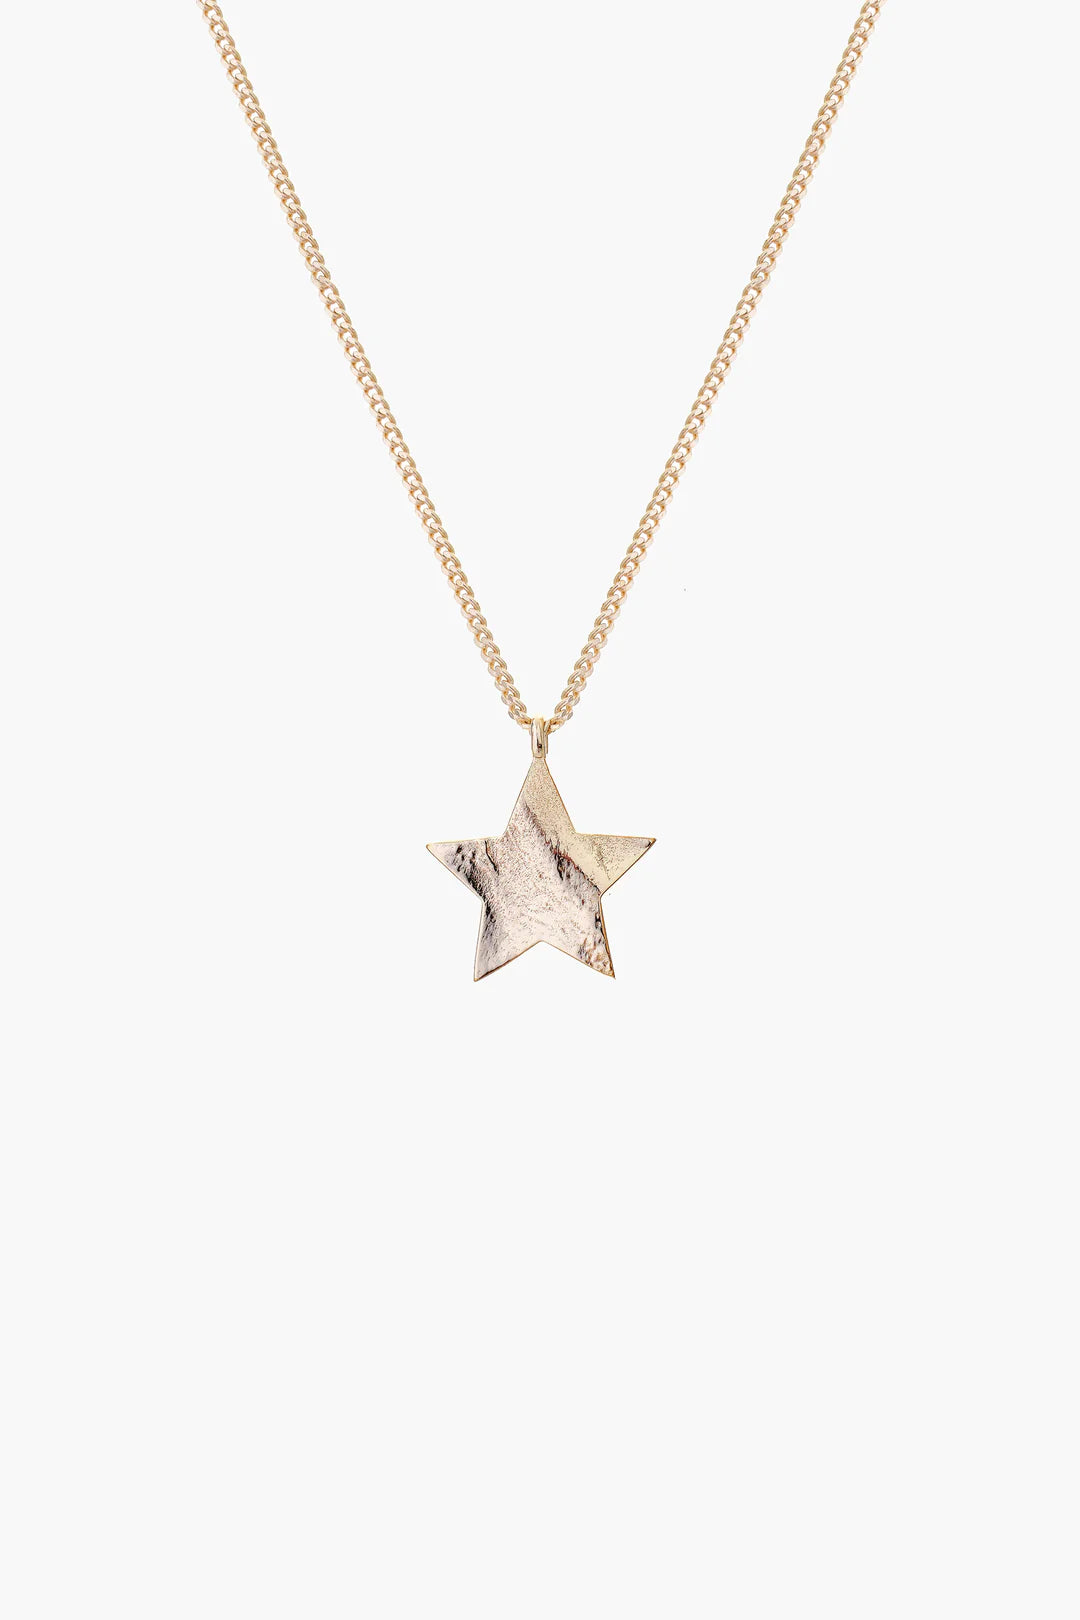 DISTANCE GOLD NECKLACE